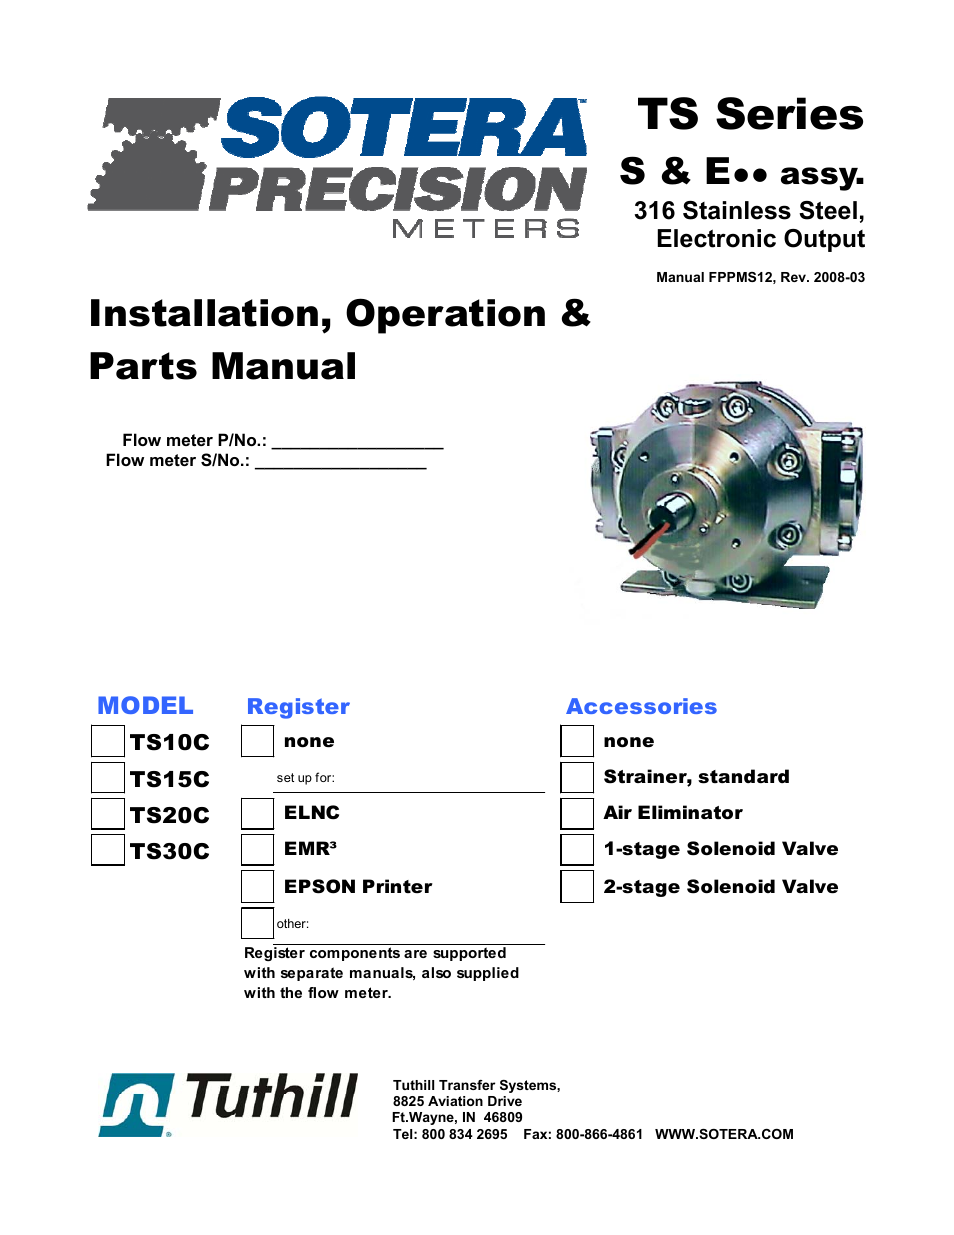 TS SS Electronic Precision Meter